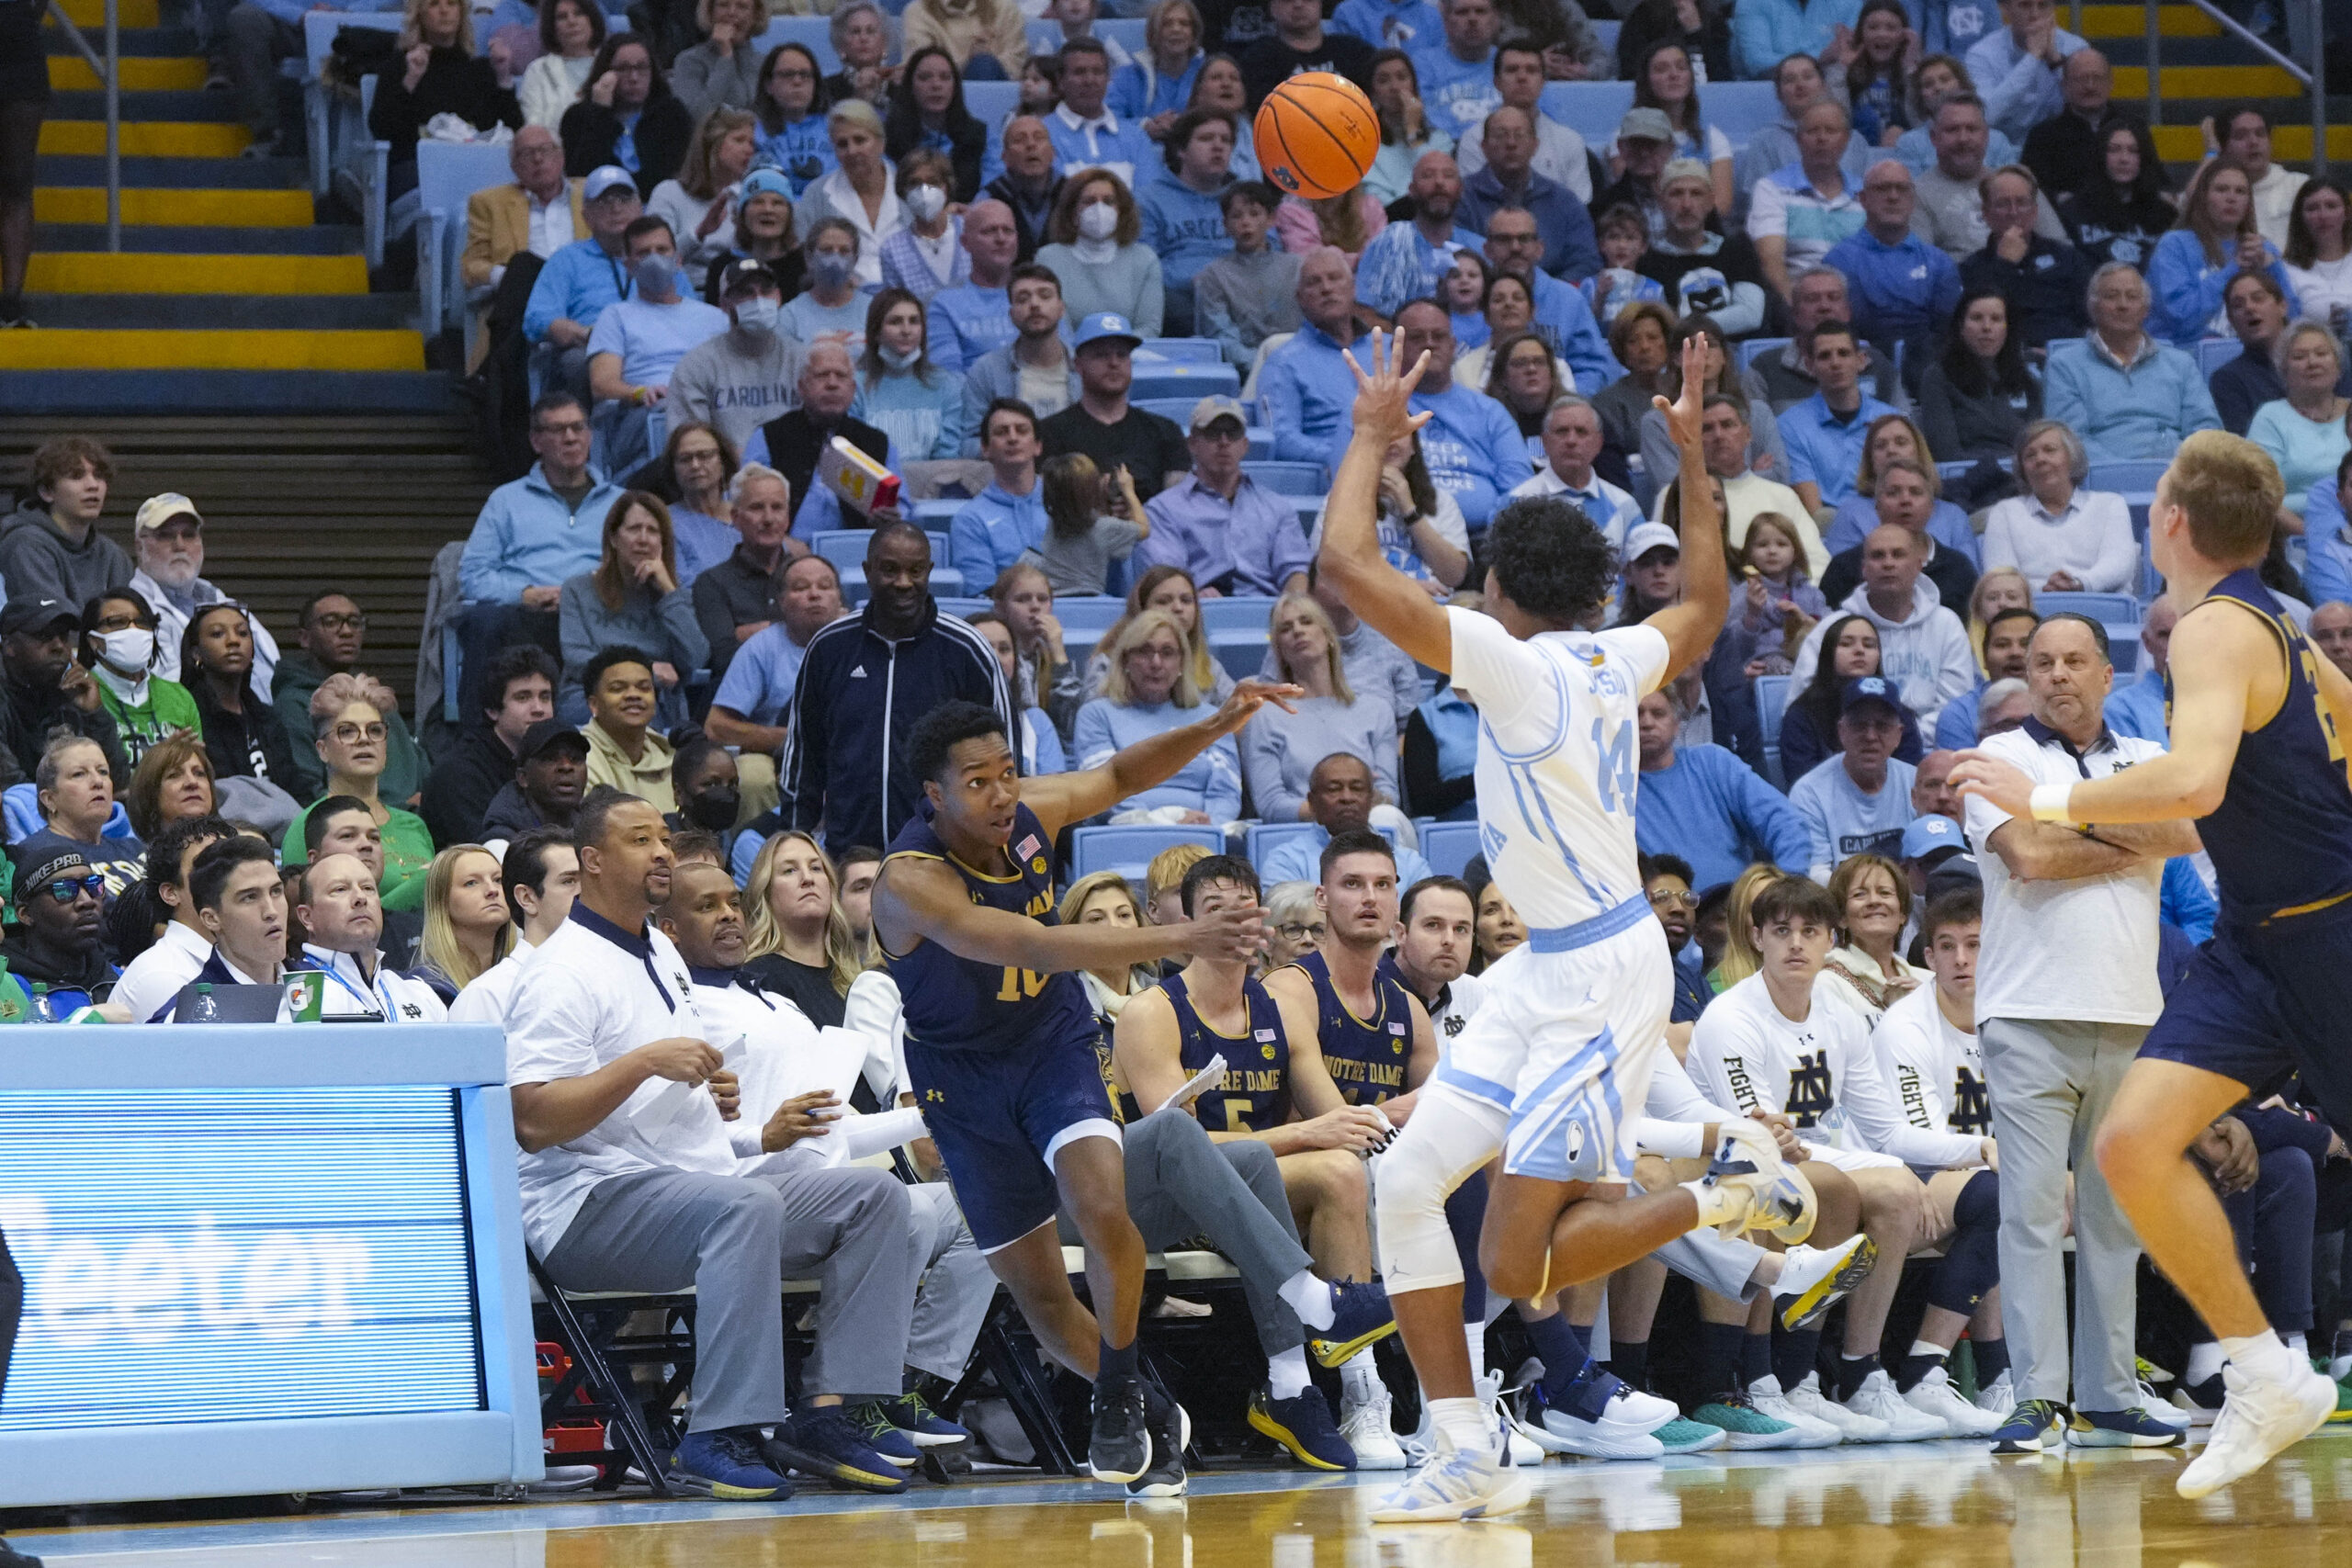 Notre Dame thoroughly outplayed by North Carolina